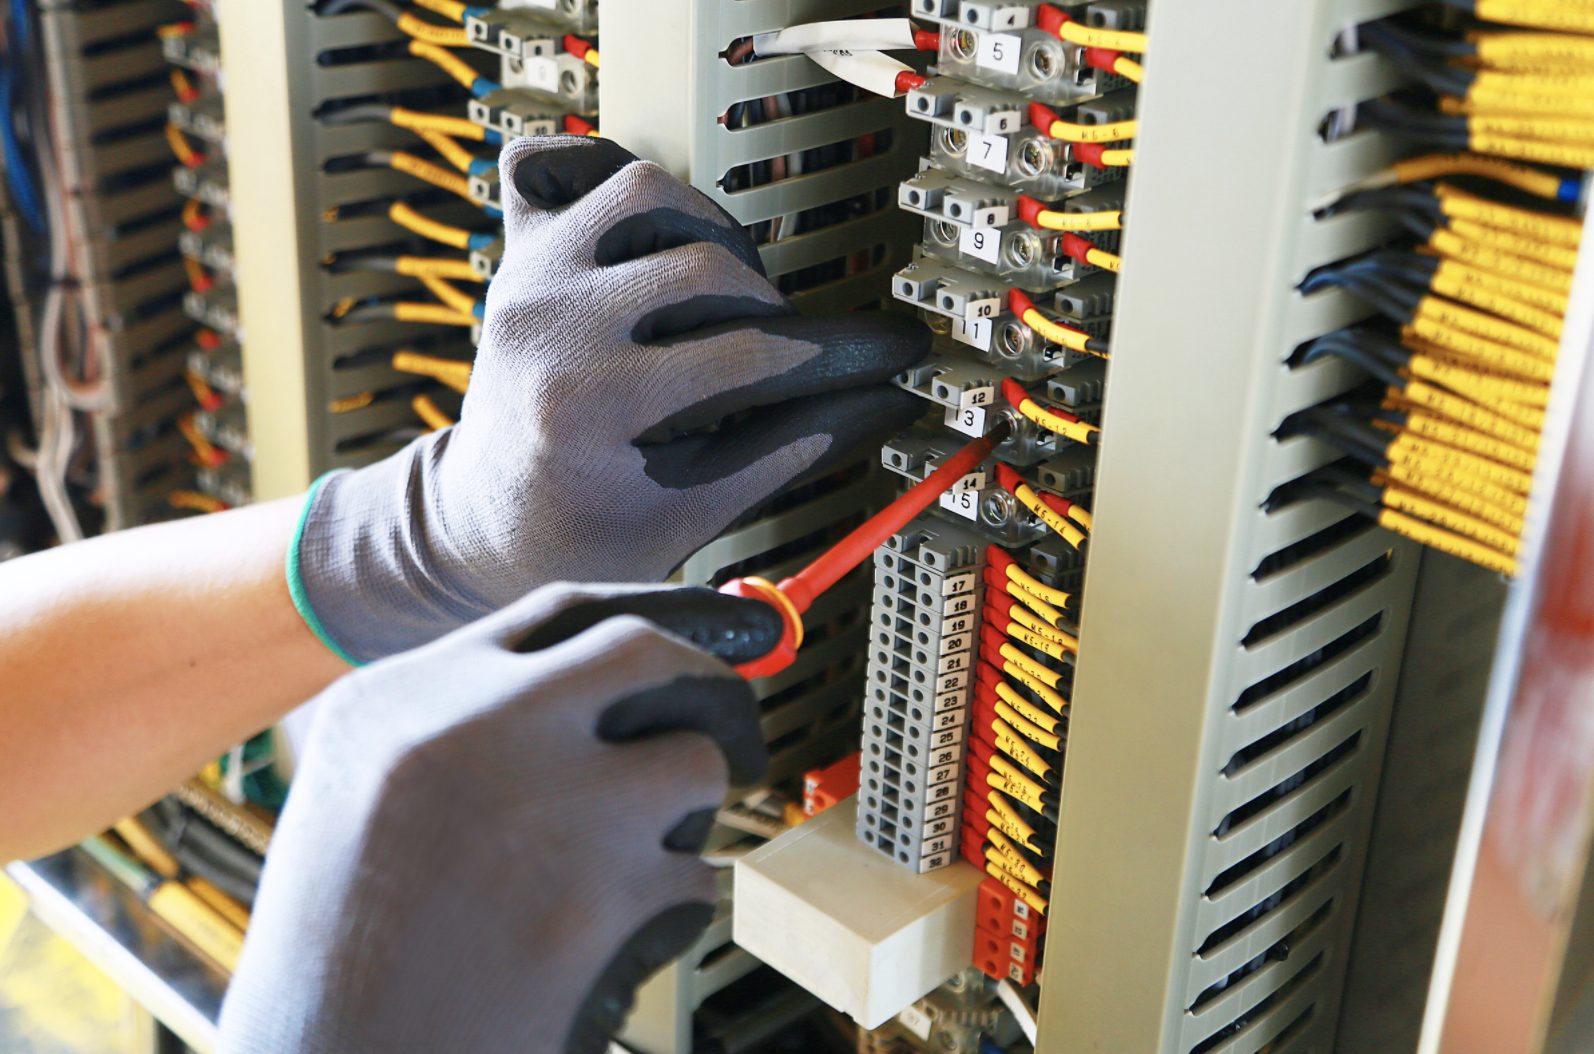 Hands working on an alarm system